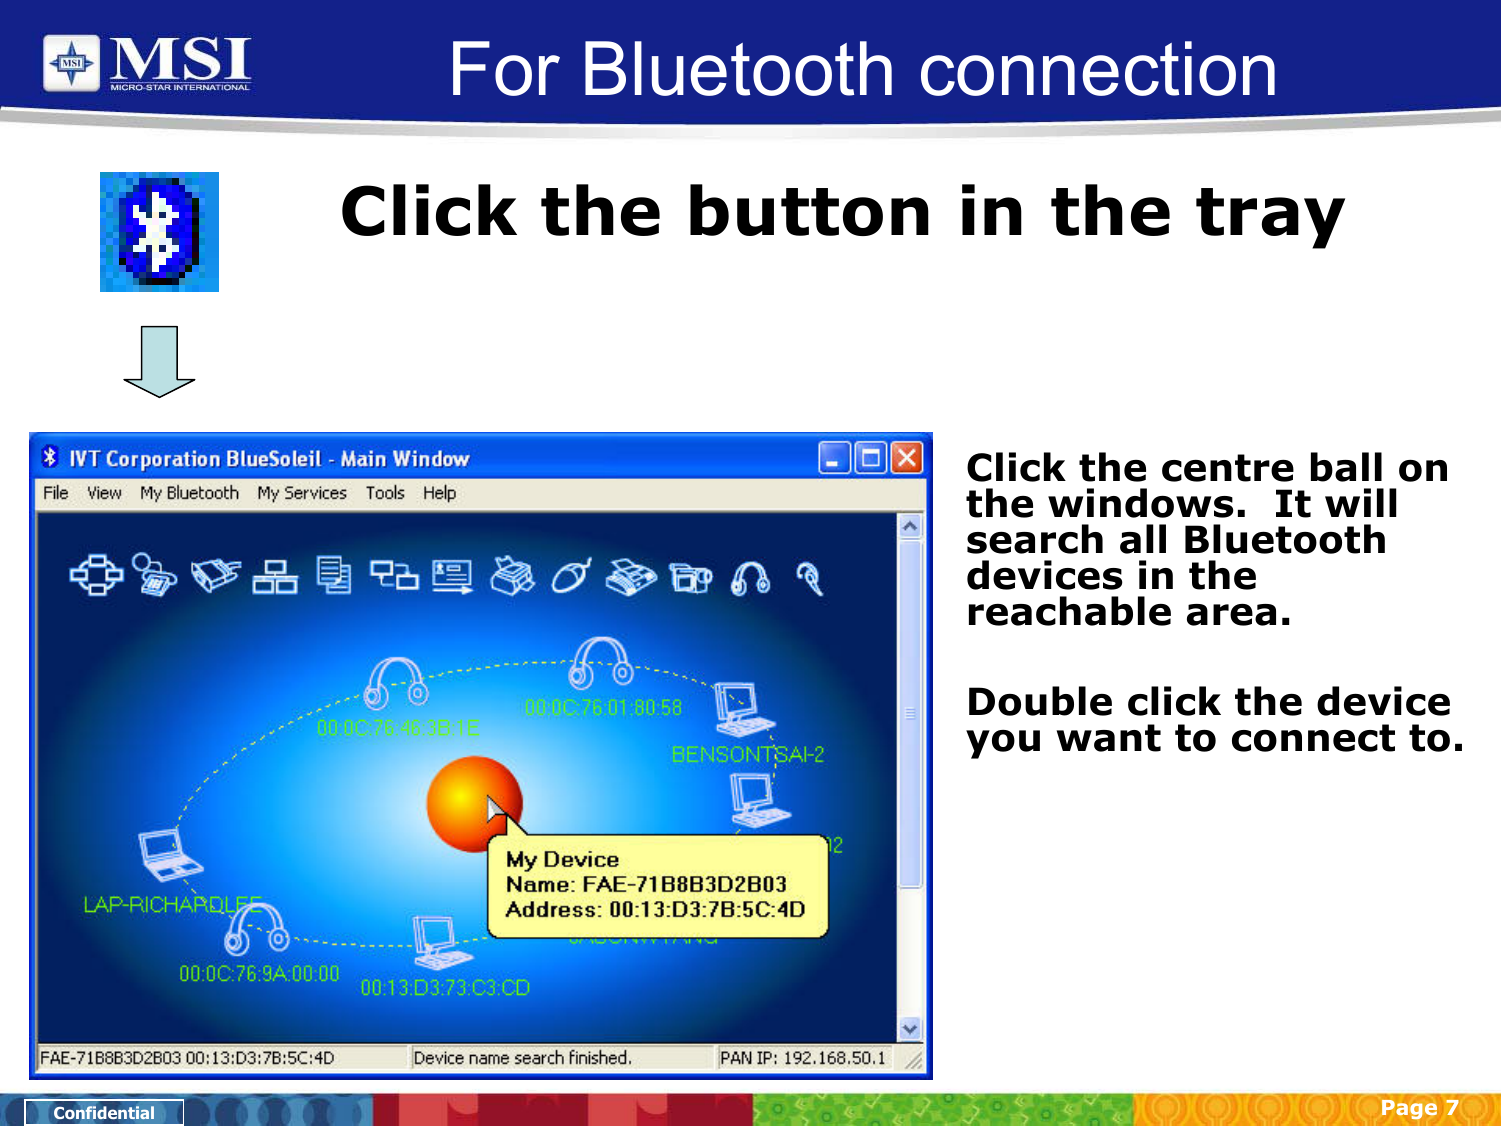 Page 7ConfidentialFor Bluetooth connectionClick the button in the trayClick the centre ball on the windows.  It will search all Bluetooth devices in the reachable area.Double click the device you want to connect to.